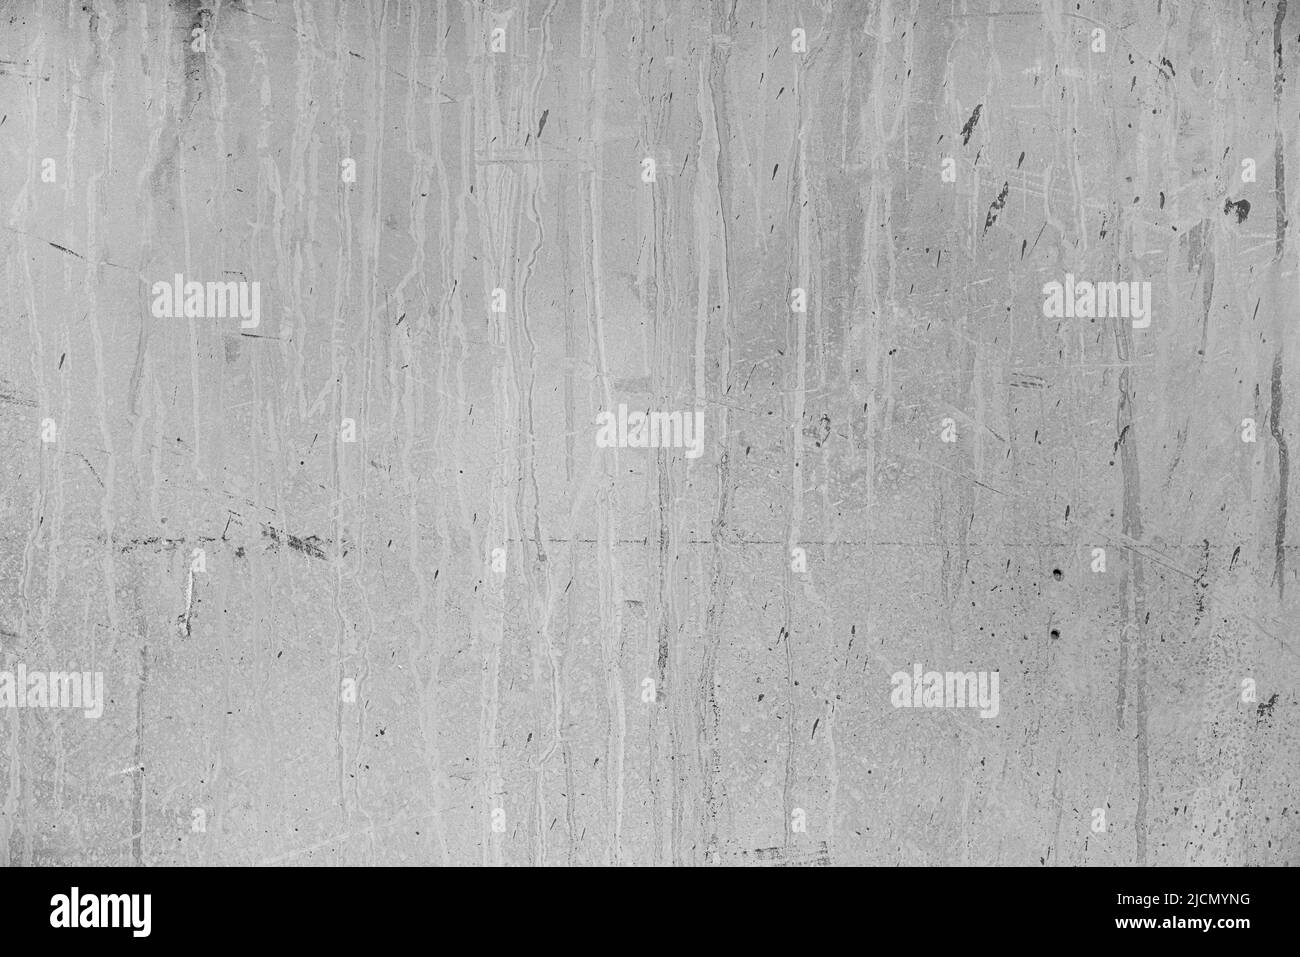 Texture dirty Grunge, mapping Texture Grunge for design Stock Photo